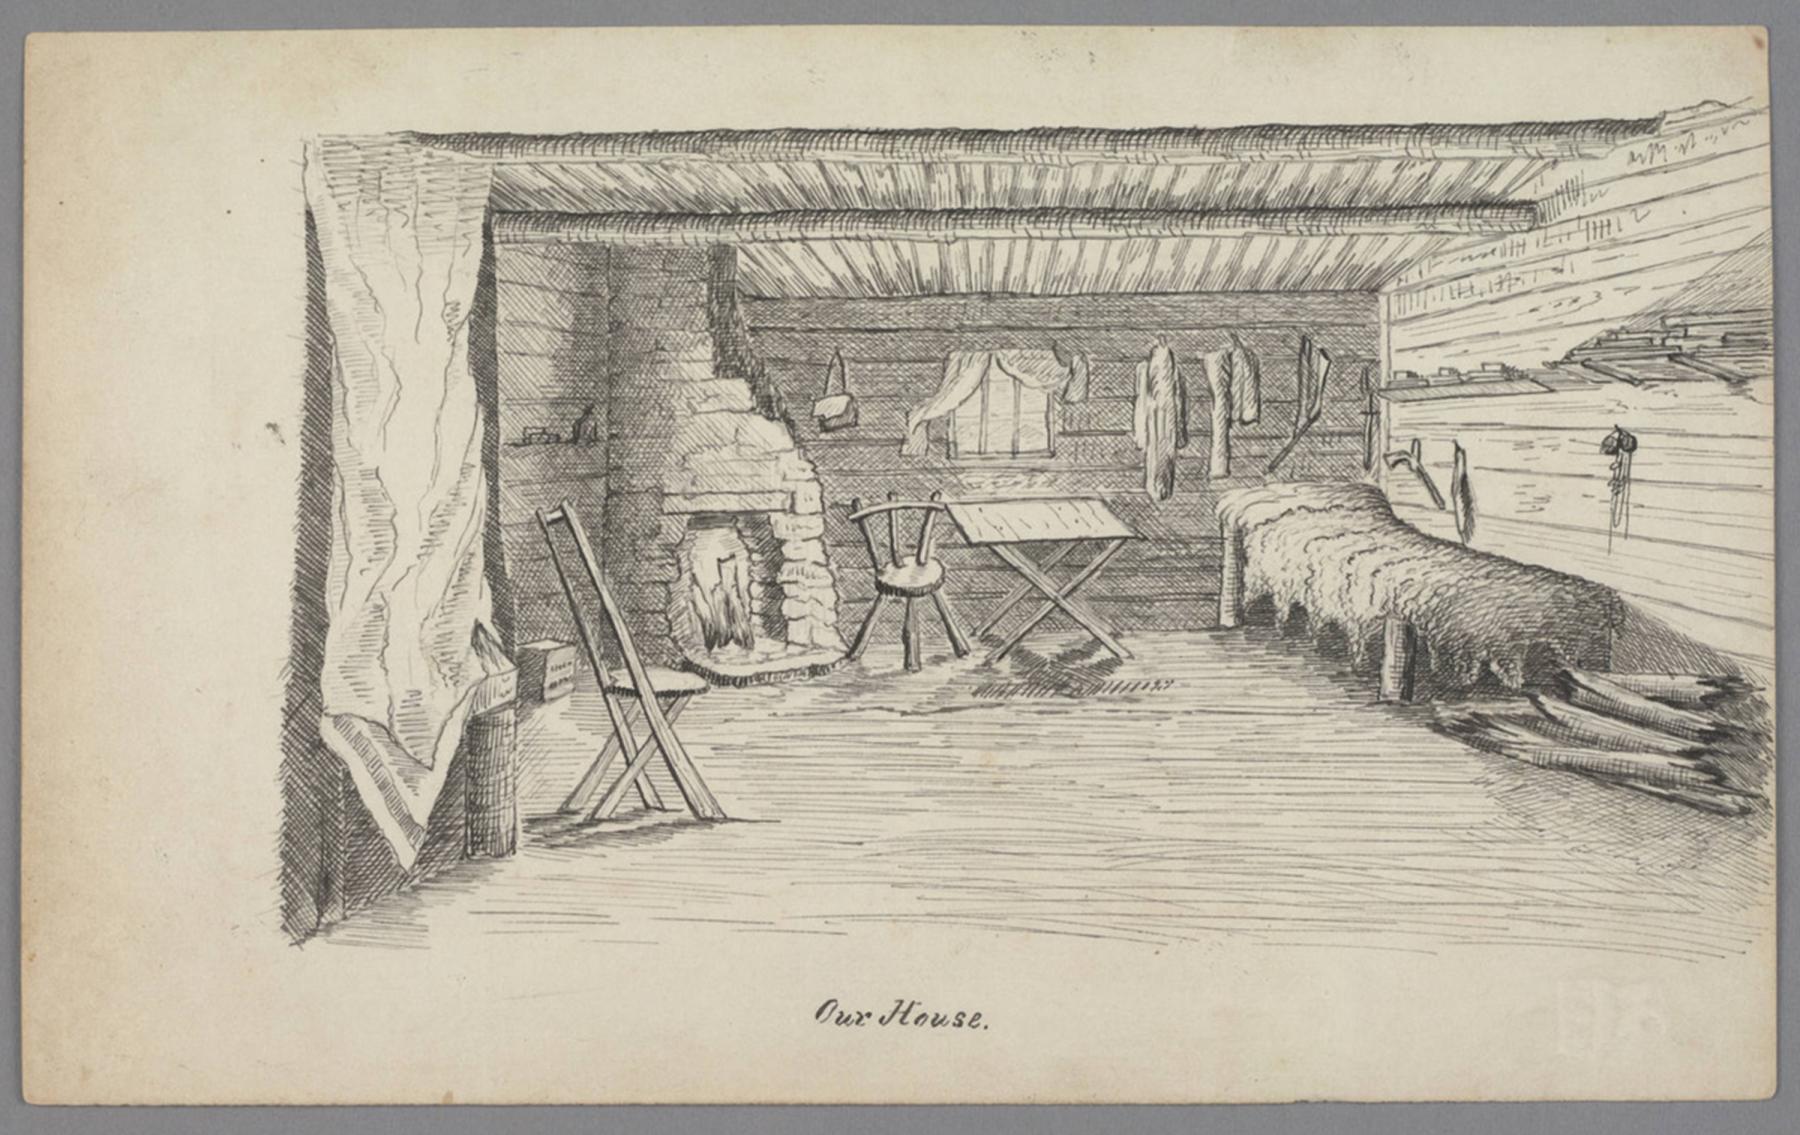 James D. Hutton titled this ink and pencil on paper drawing “Our House,” showing the inside of his quarters at Deer Creek. The log structure had dirt floors and the roof was covered with boards, brush and dirt. The Huntington Library. 